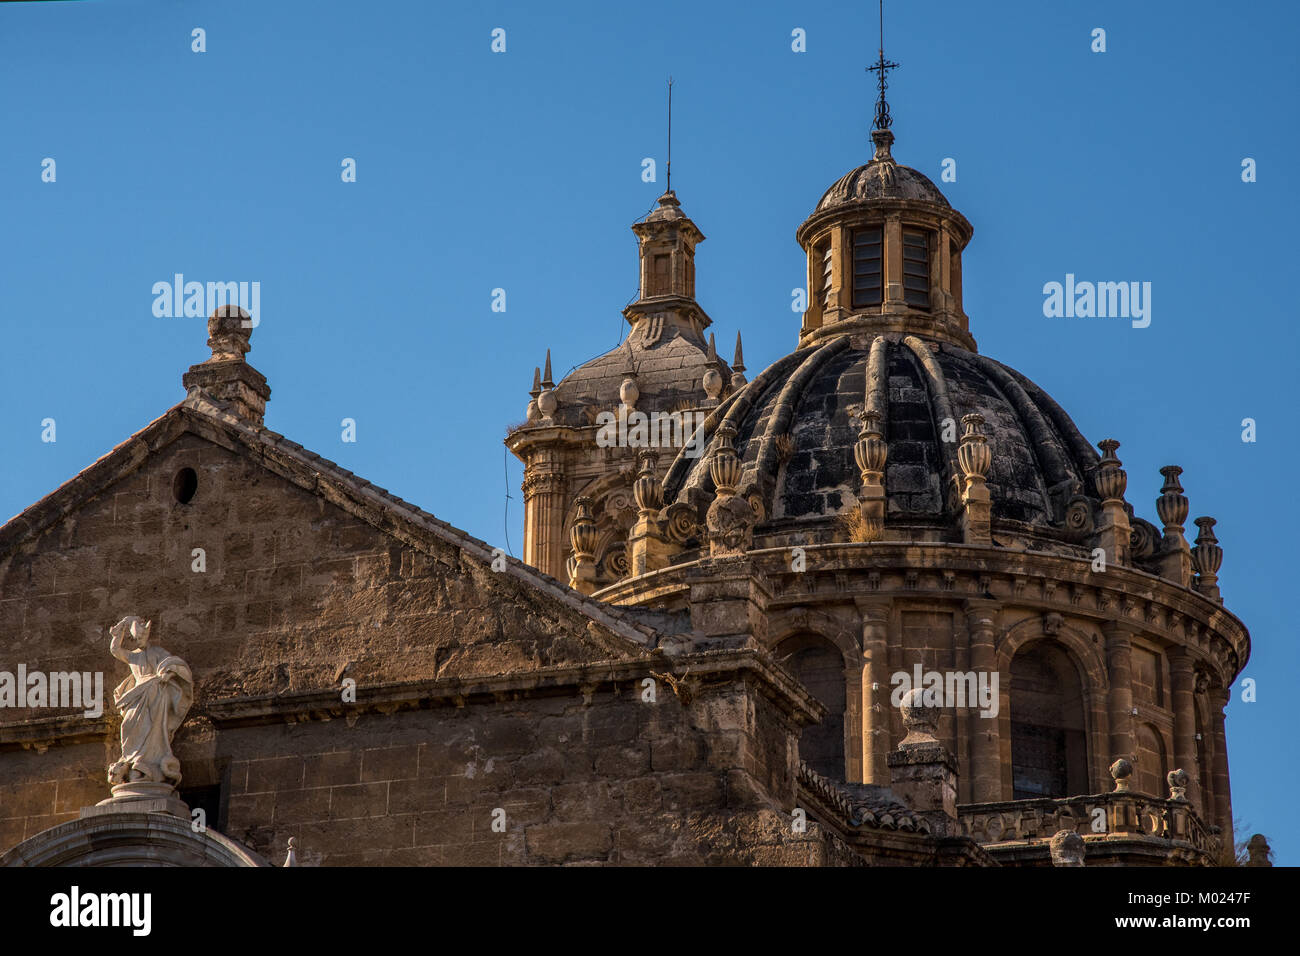 GRANADA, ANDALUSIA / SPAIN - OCTOBER 16 2017: CATHEDRAL PALACE Stock Photo